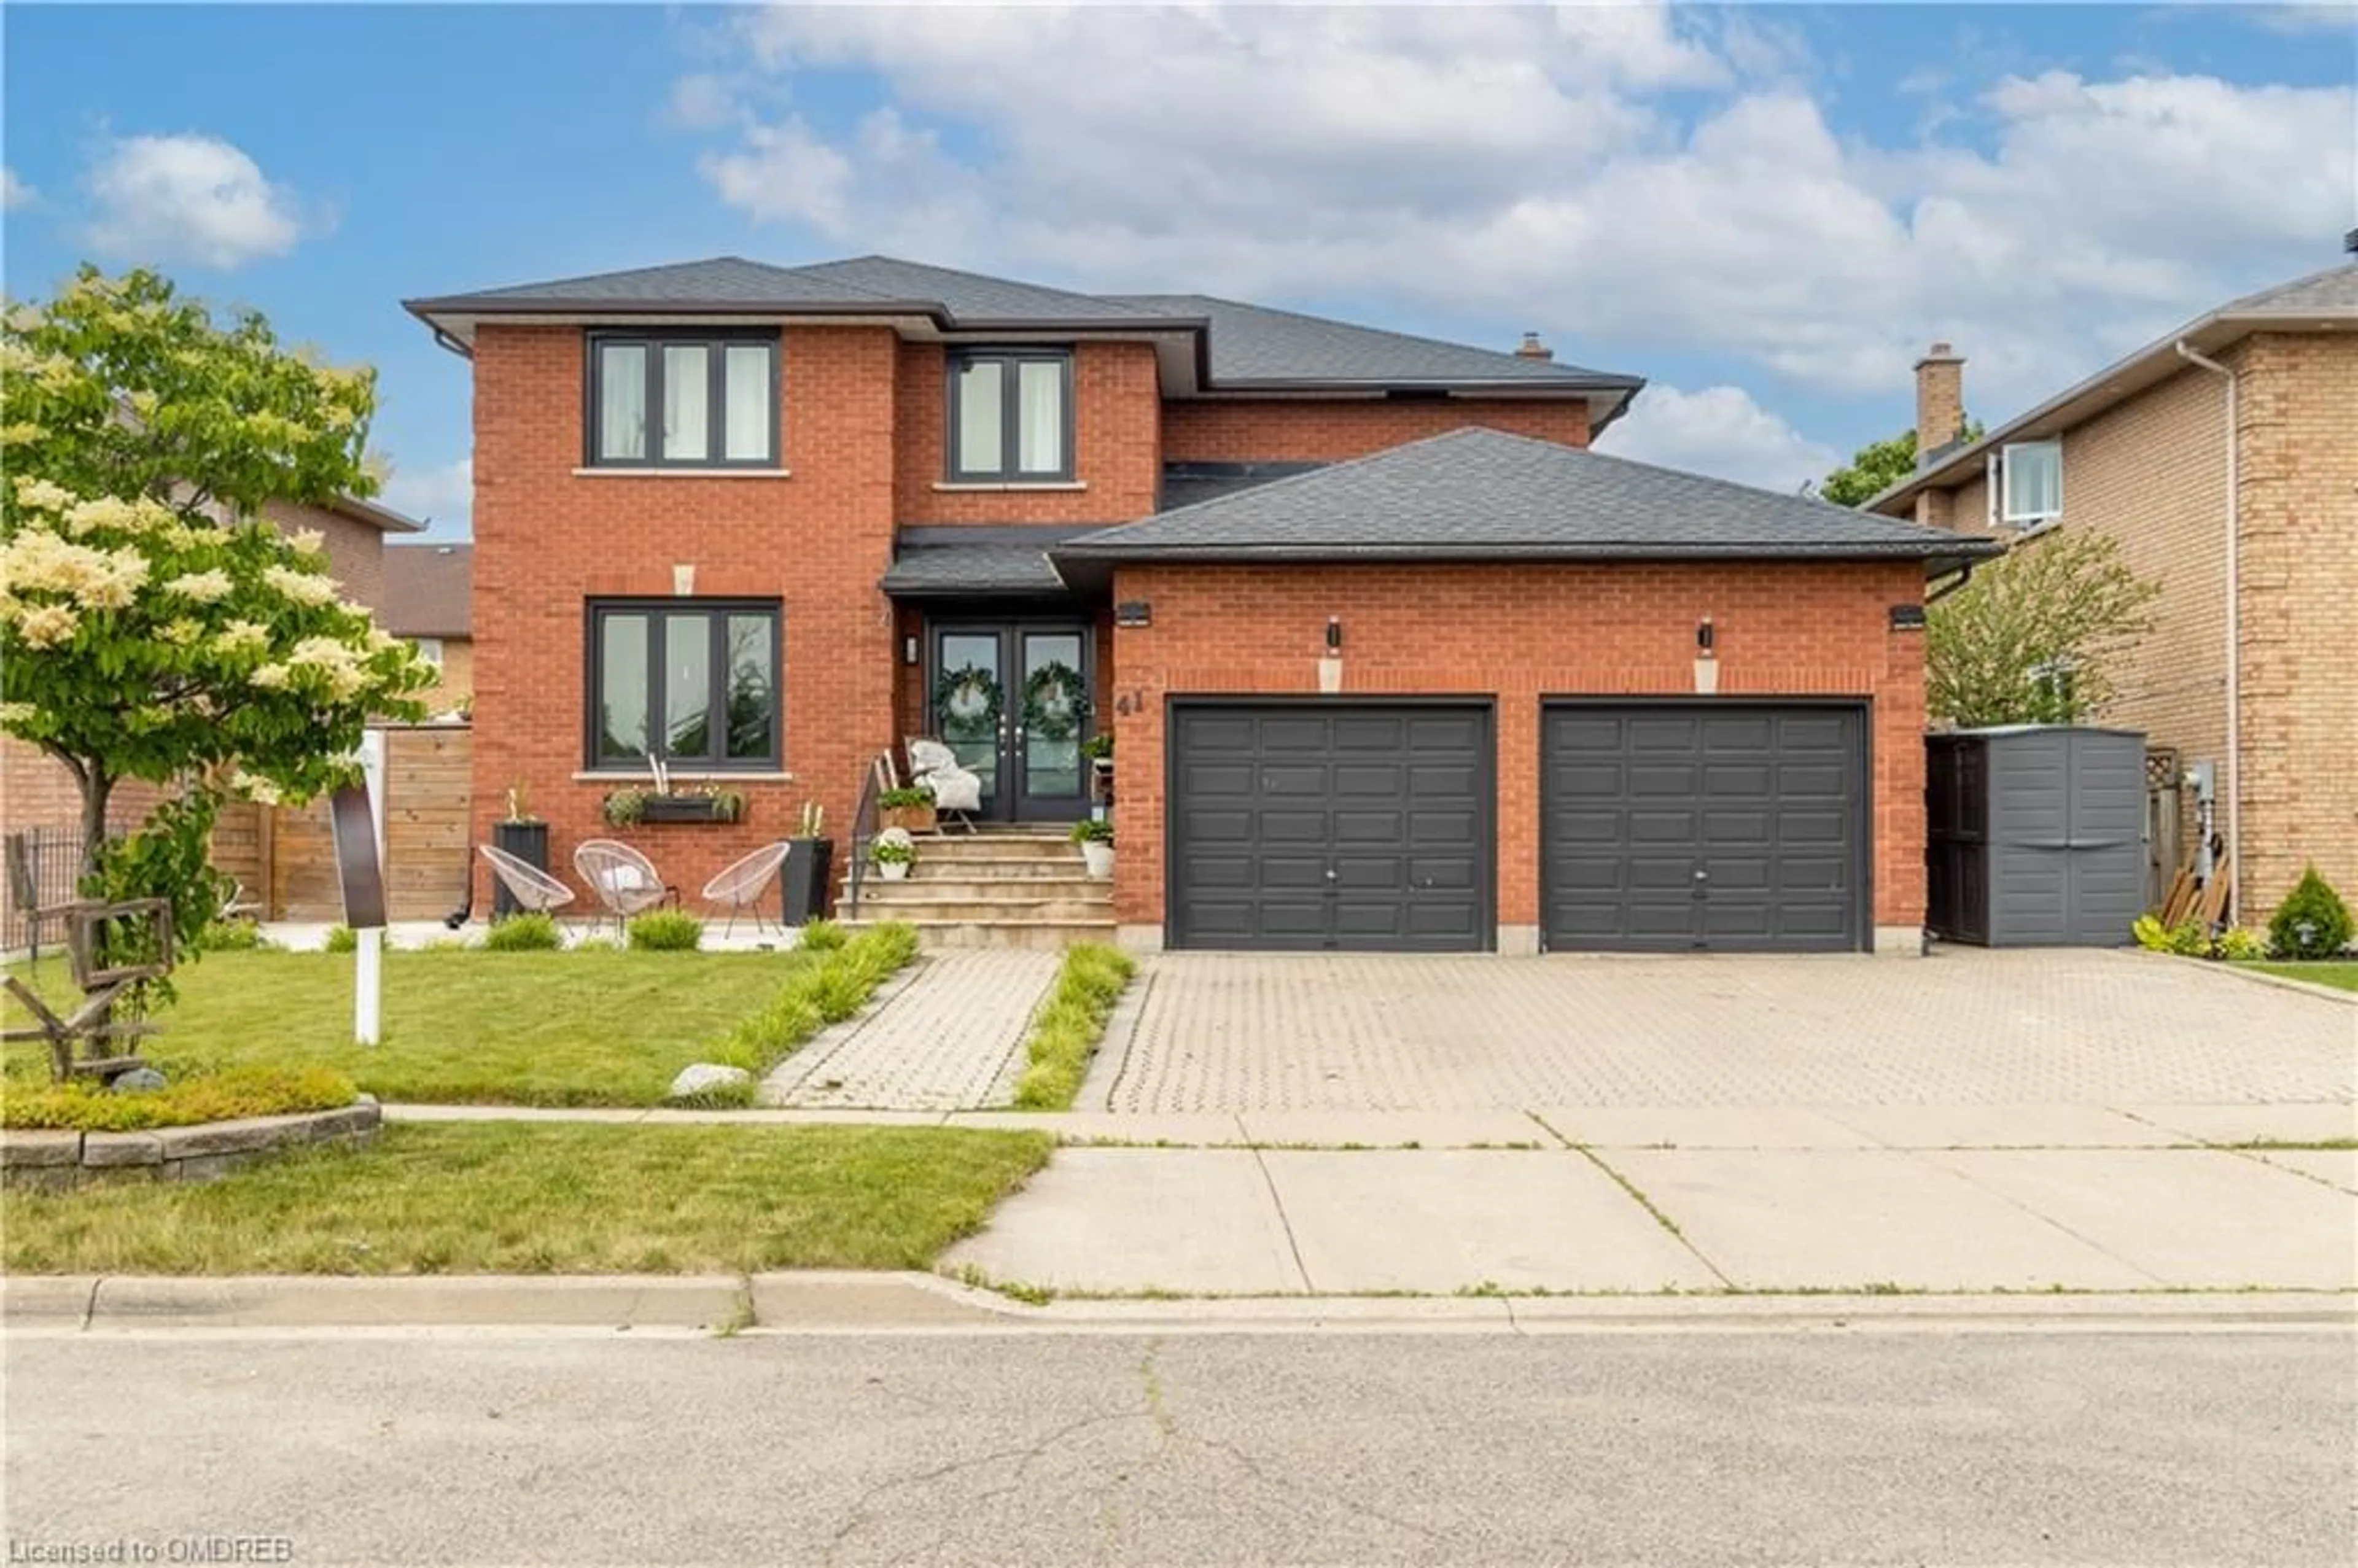 Home with brick exterior material for 41 Regalview Dr, Stoney Creek Ontario L8G 4Y6